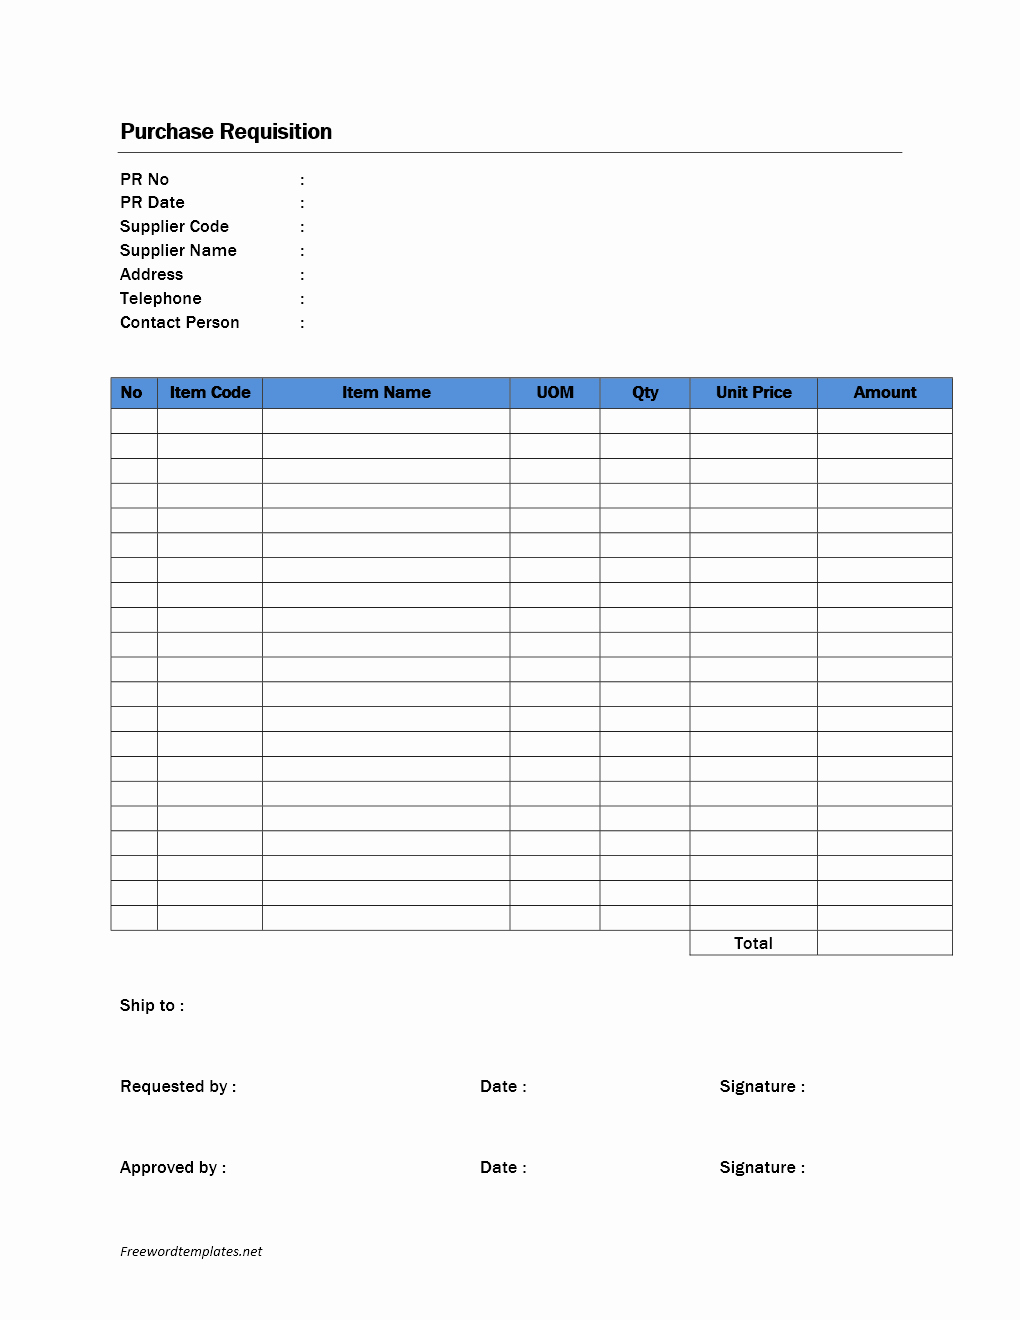 Purchase Requisition form Template New Purchase Requisition form